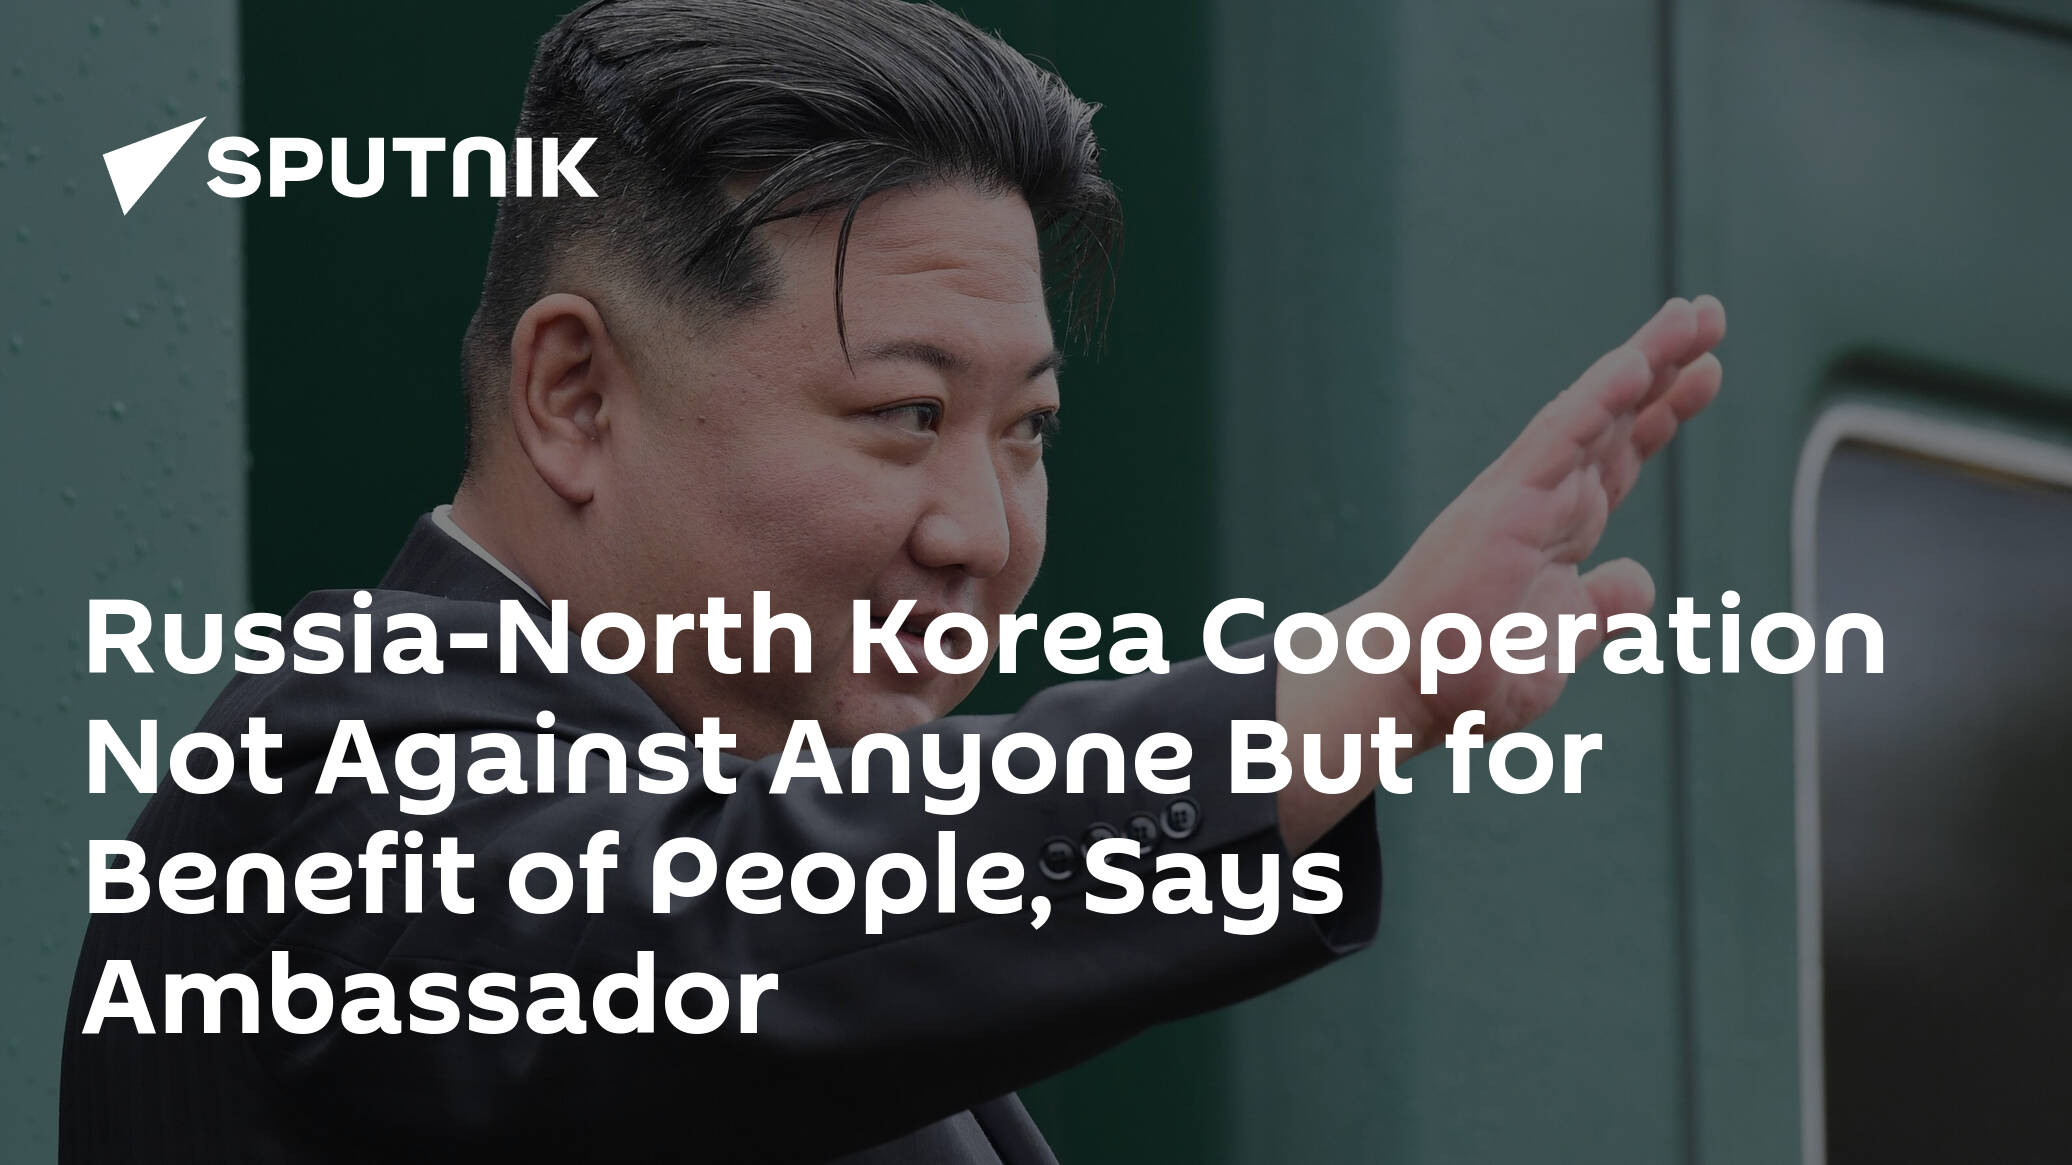 Russia-North Korea Cooperation Not Against Anyone But for Benefit of People, Says Ambassador